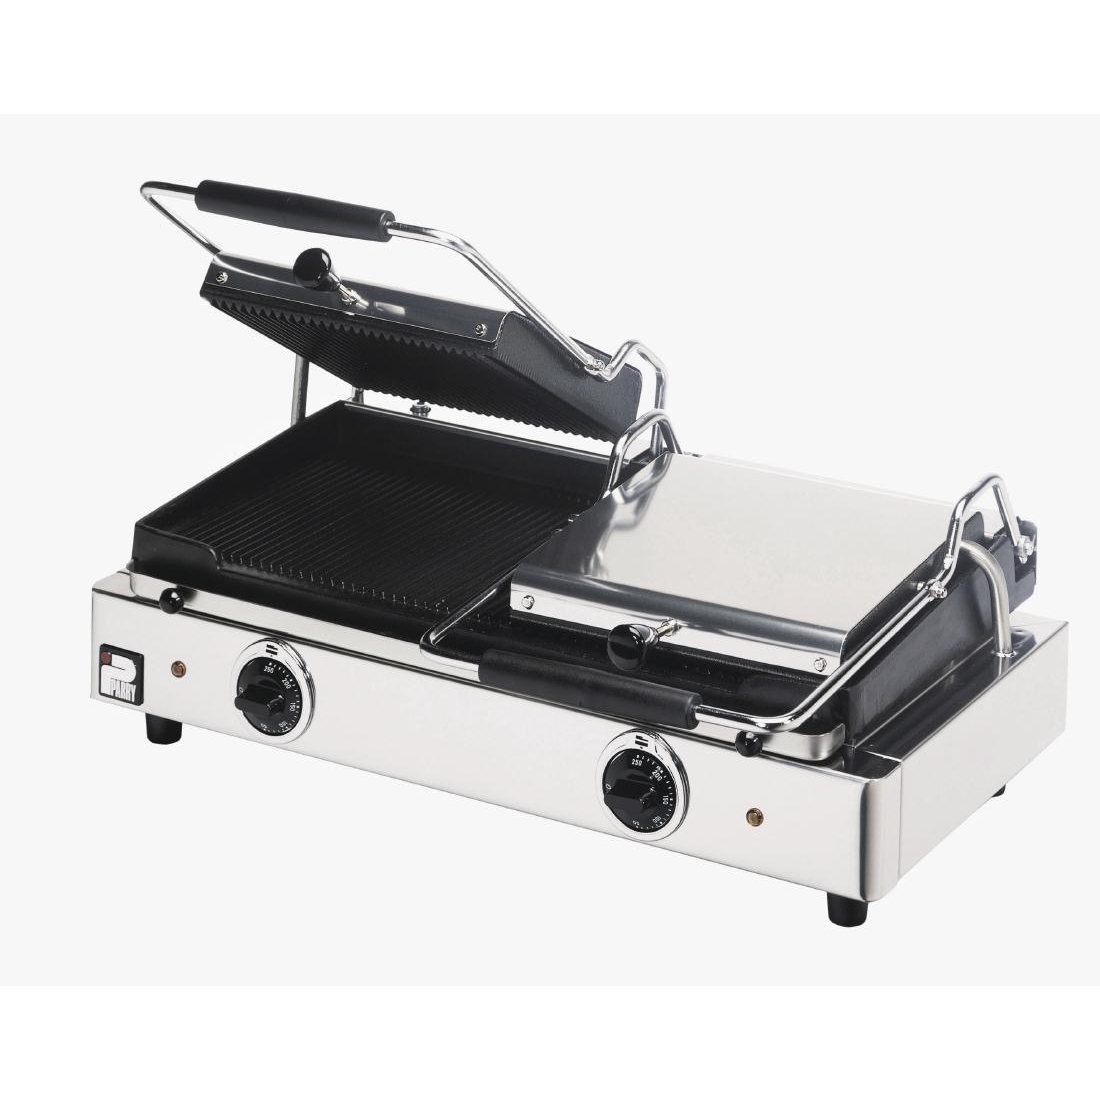 Parry Fiamma Twin Panini Grill PPGT3